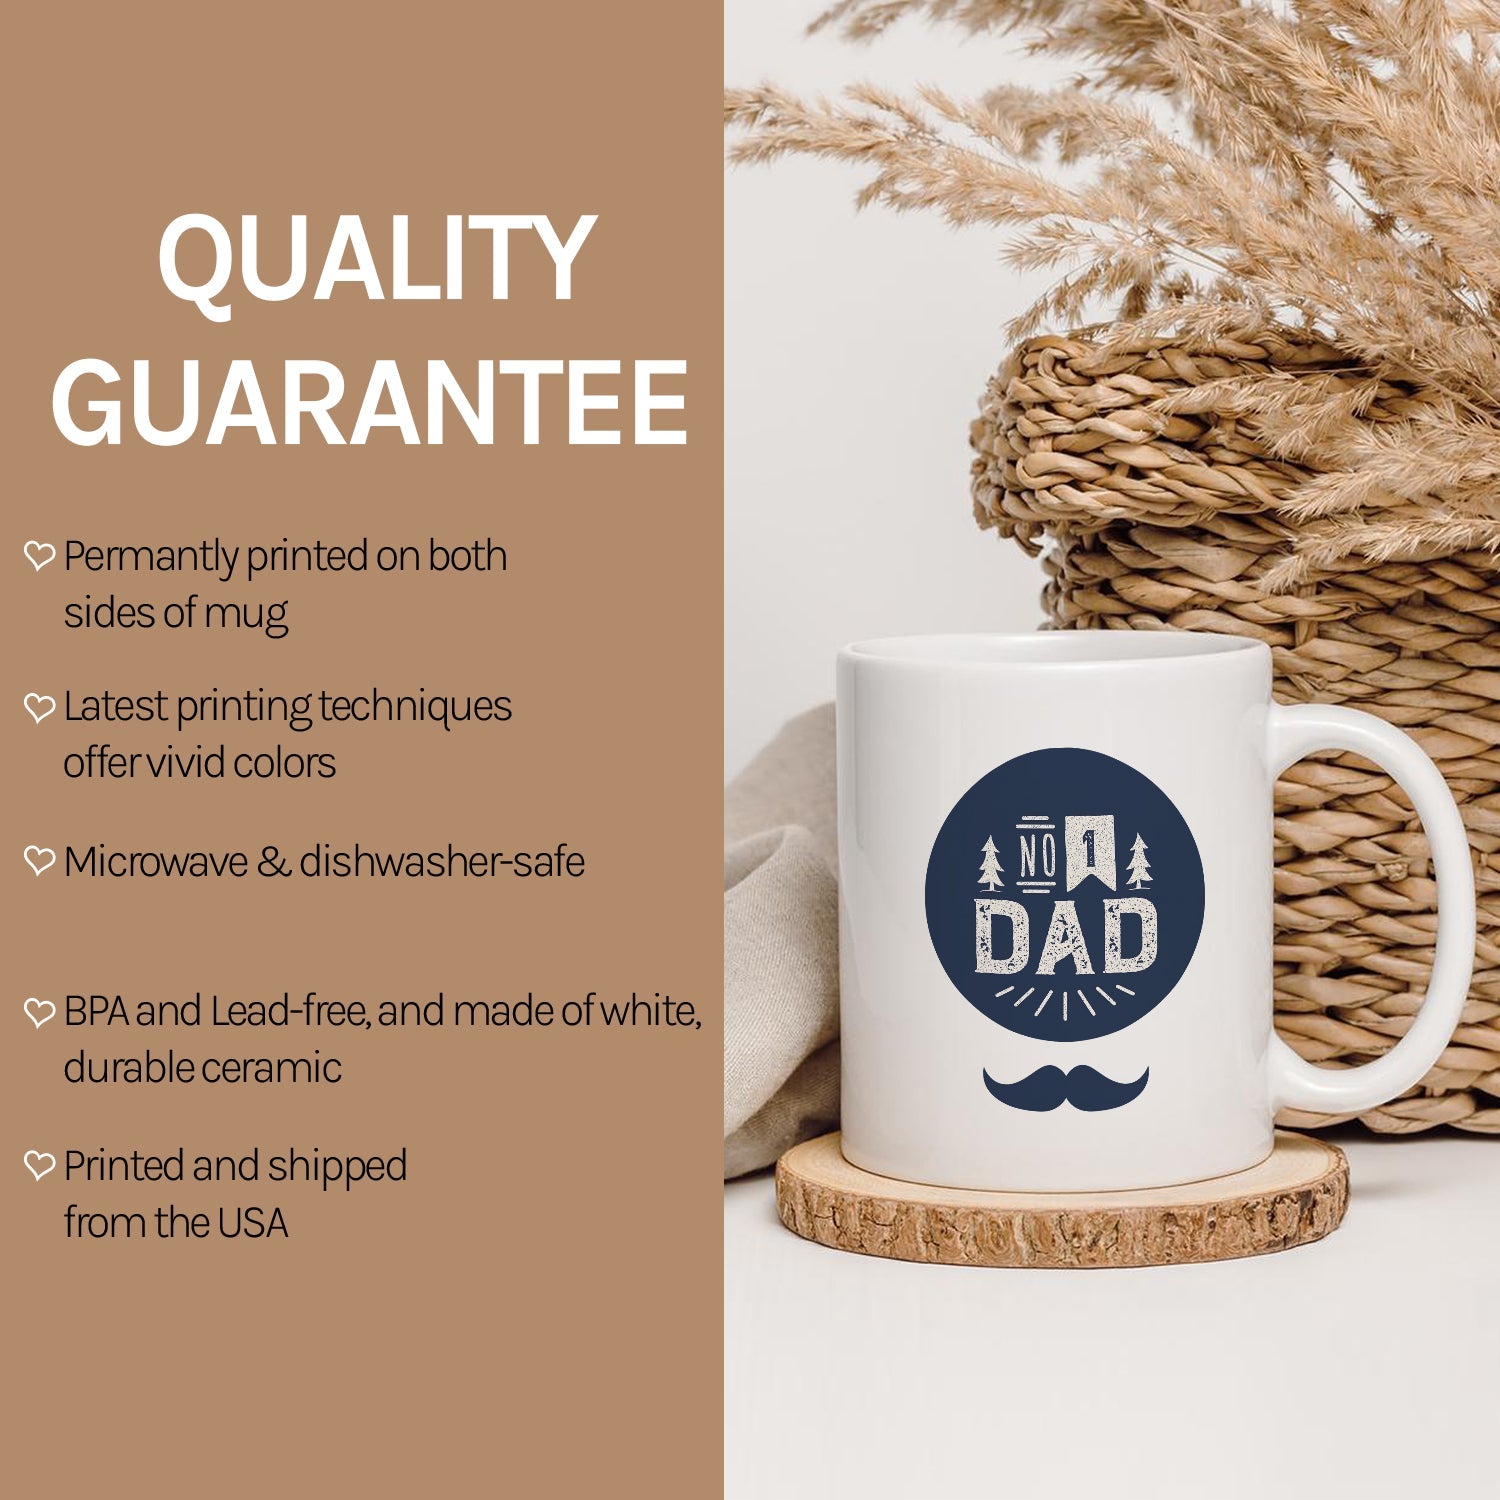 Forget Father'S Day, We Love You Every Day - Personalized Father's Day gift for Dad - Custom Mug - MyMindfulGifts